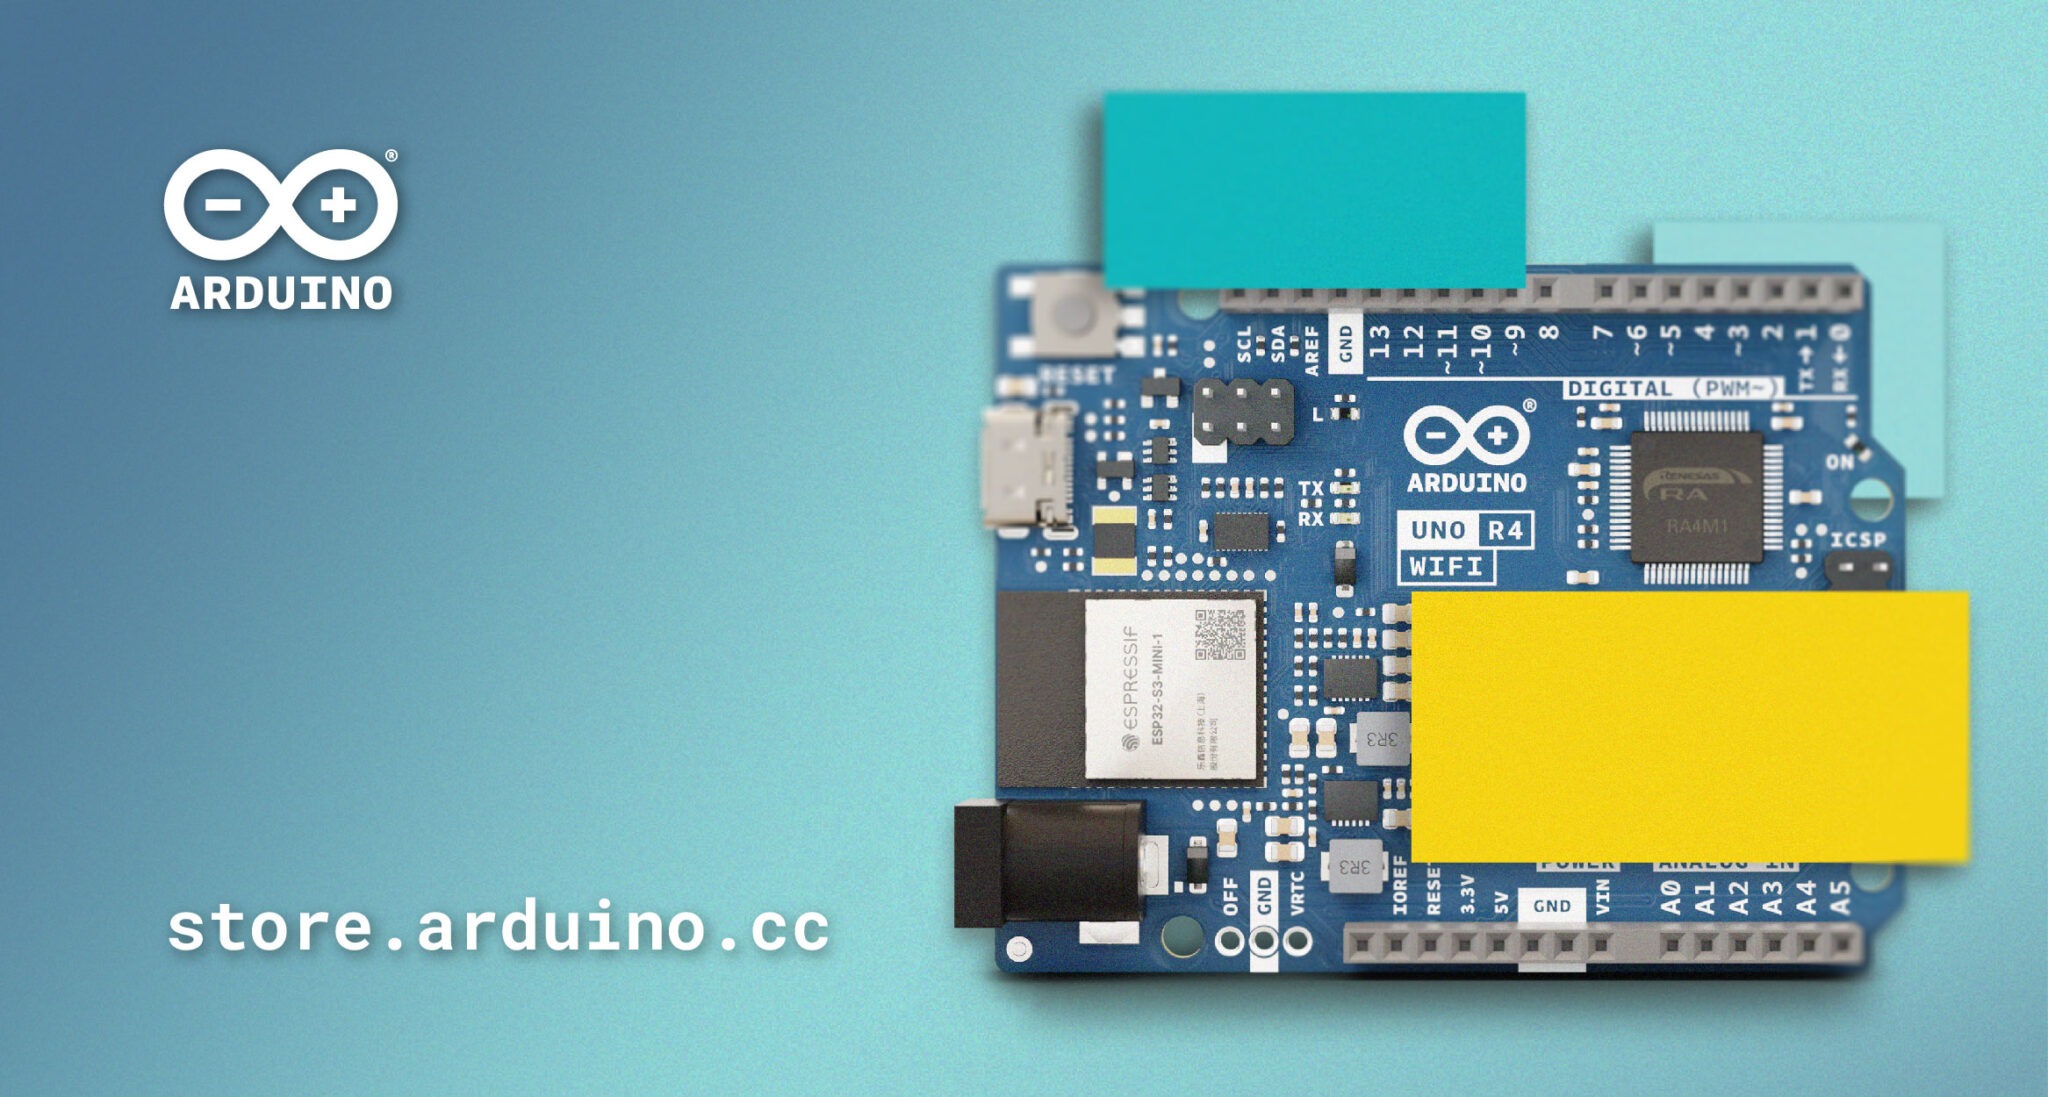 Arduino UNO R4 is a giant leap forward for an open source community of millions